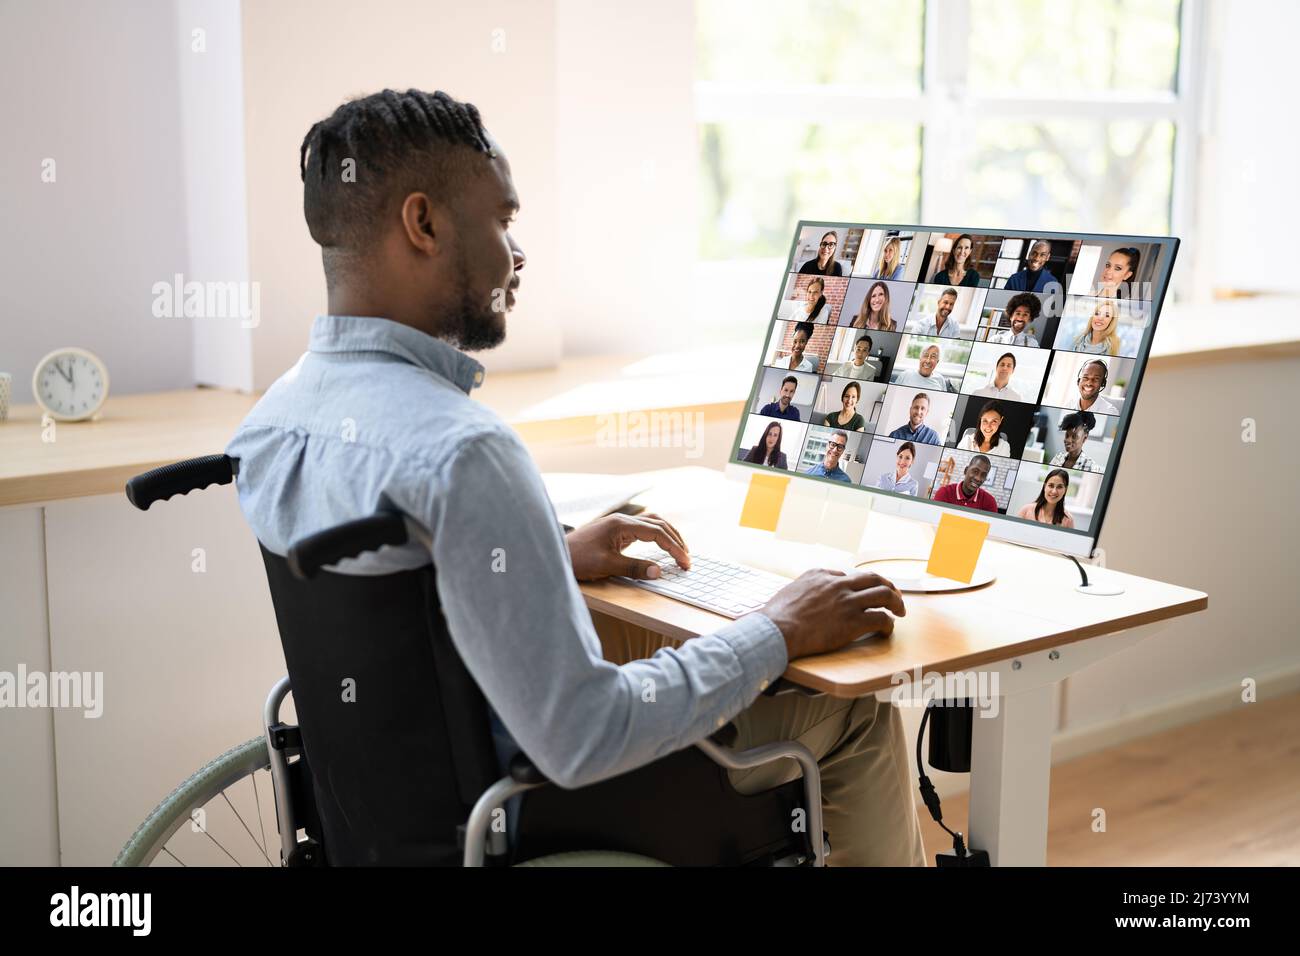 Online Remote Video Conference Meet Call Or Webinar Stock Photo